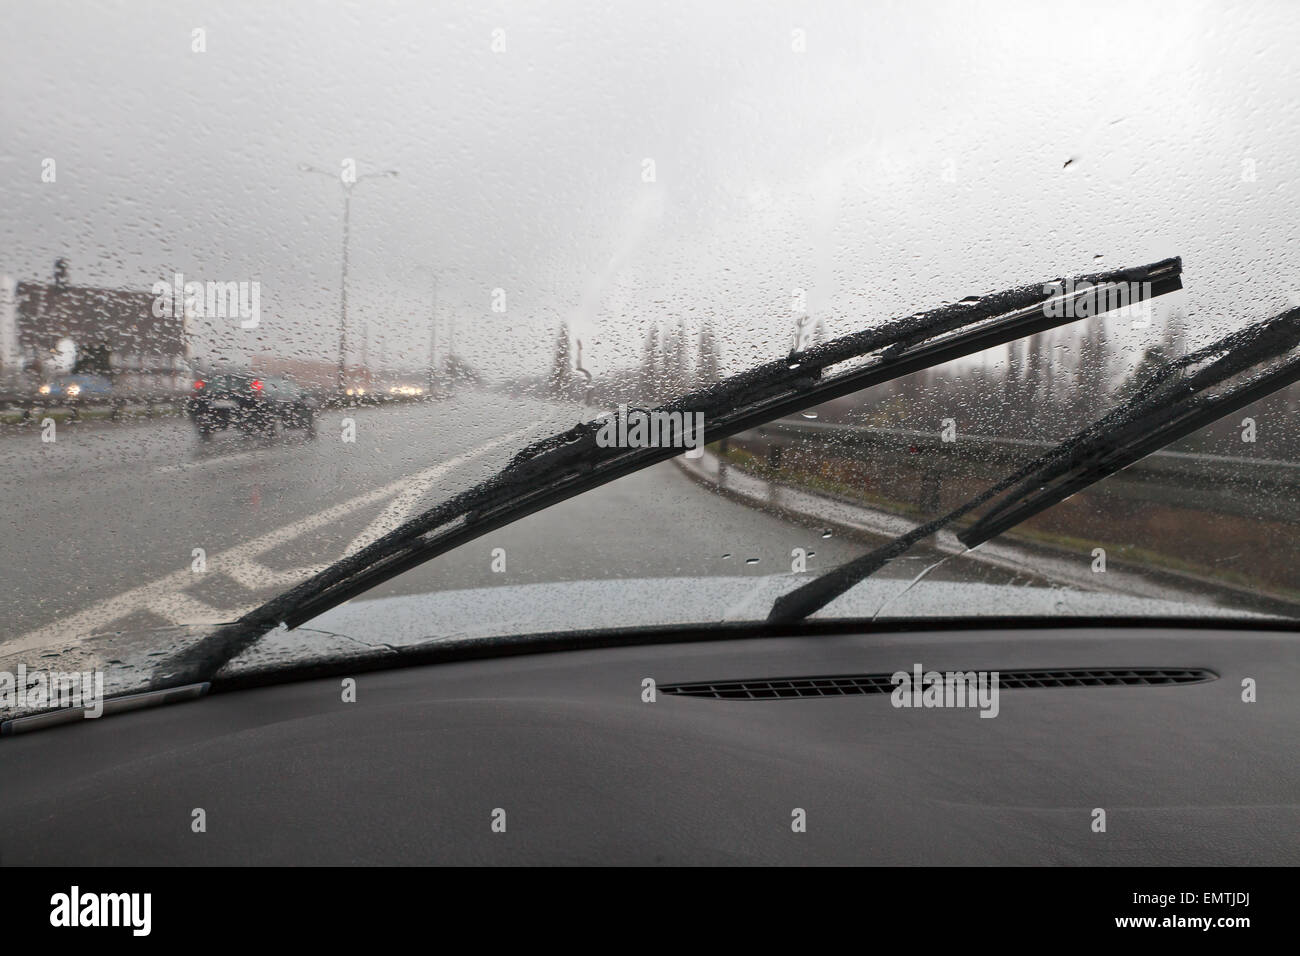 Bad weather conditions driving car, wipers working Stock Photo